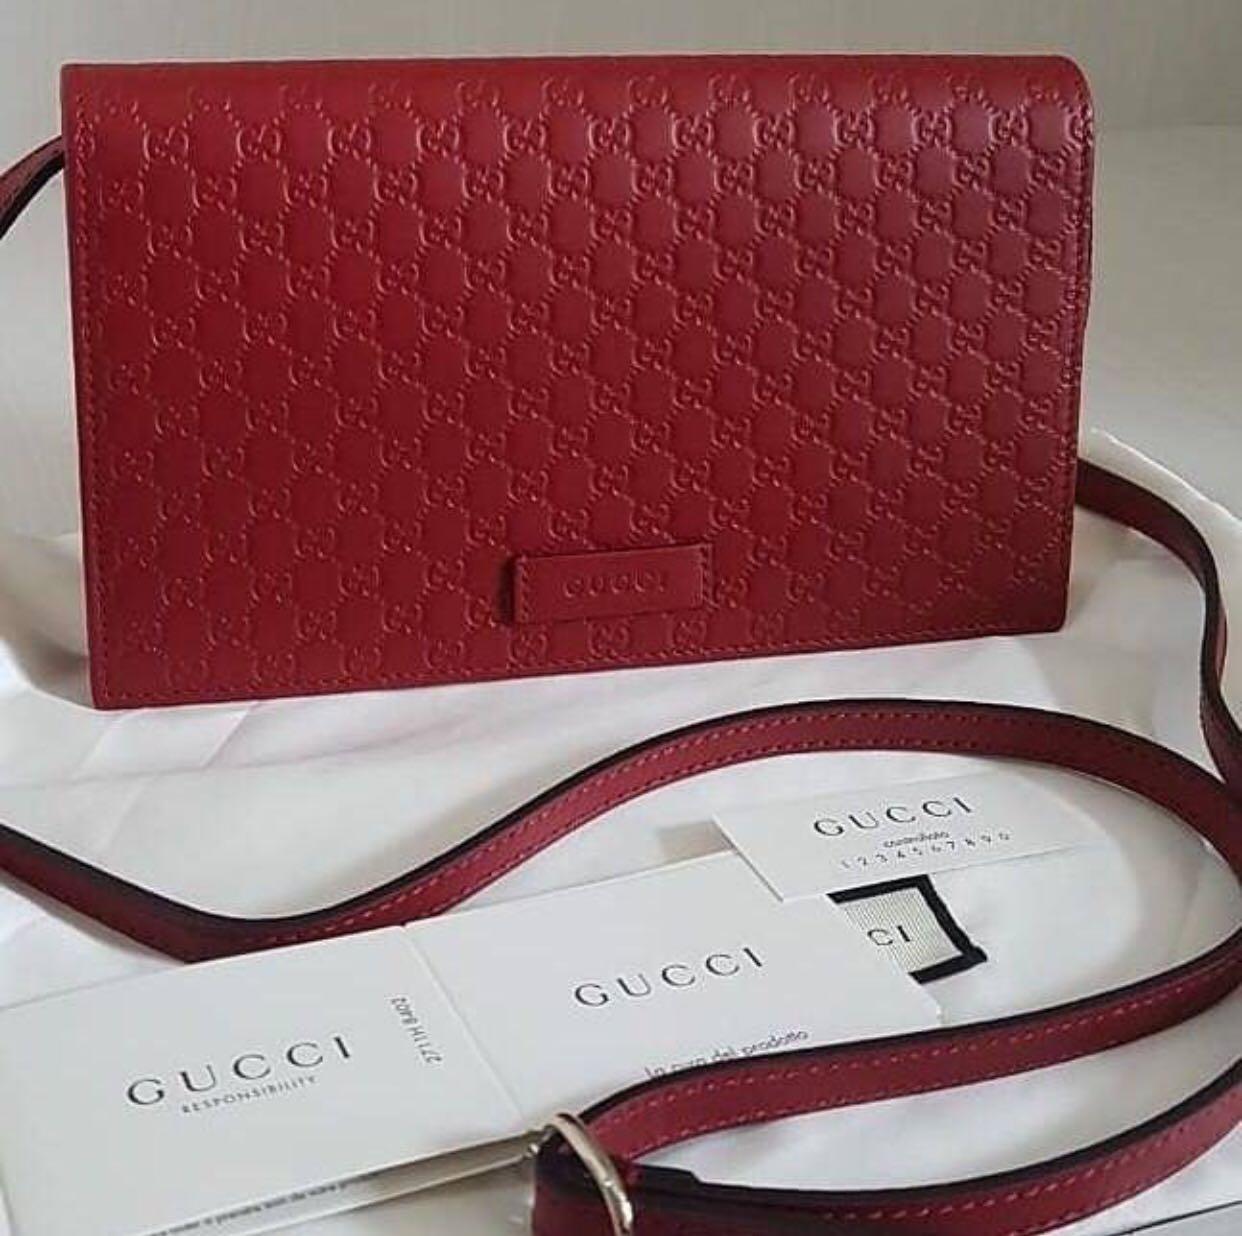 Good deal New GUCCI WOC Guccissima in 